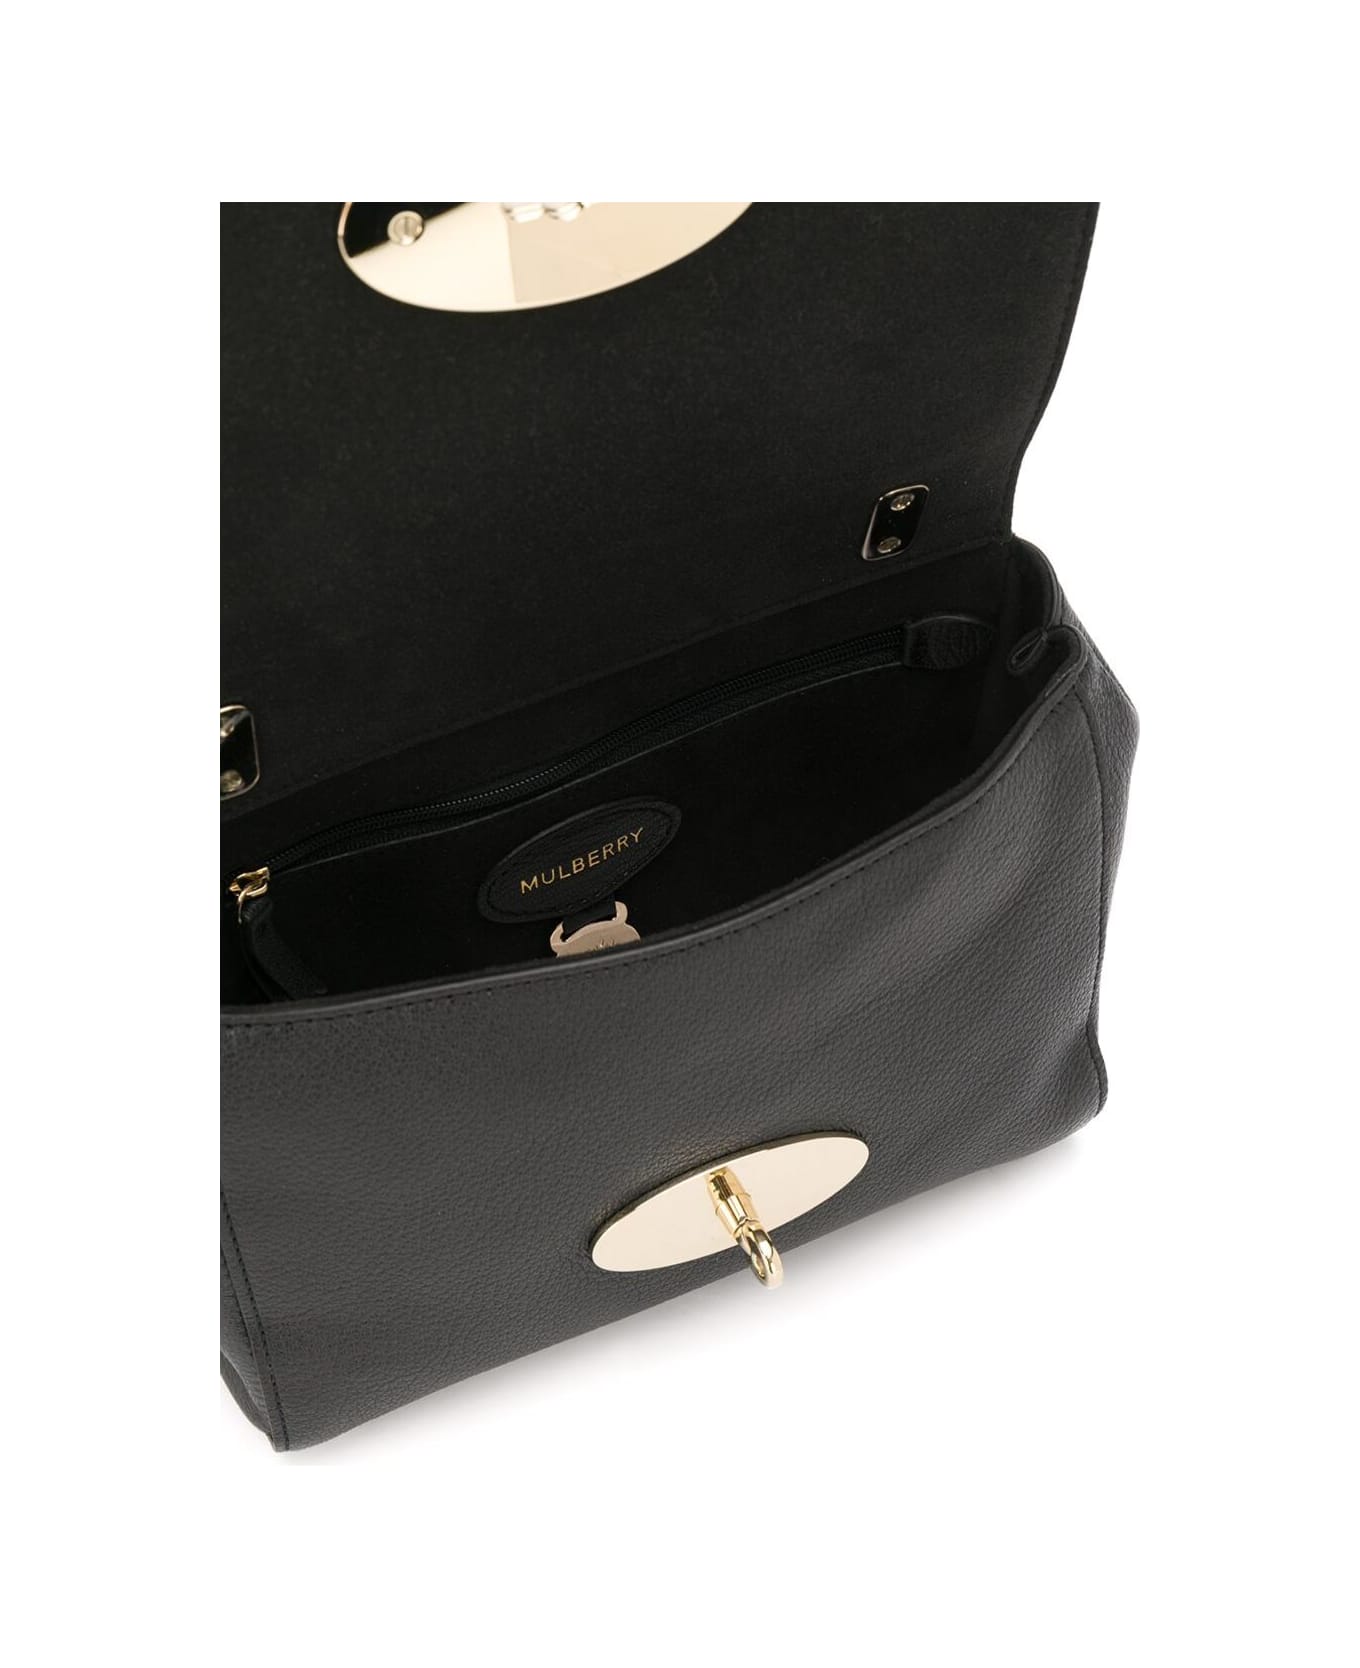 Mulberry 'lilly' Black Shoulder Bag With Twist Lock Closure In Leather Woman - Black ショルダーバッグ